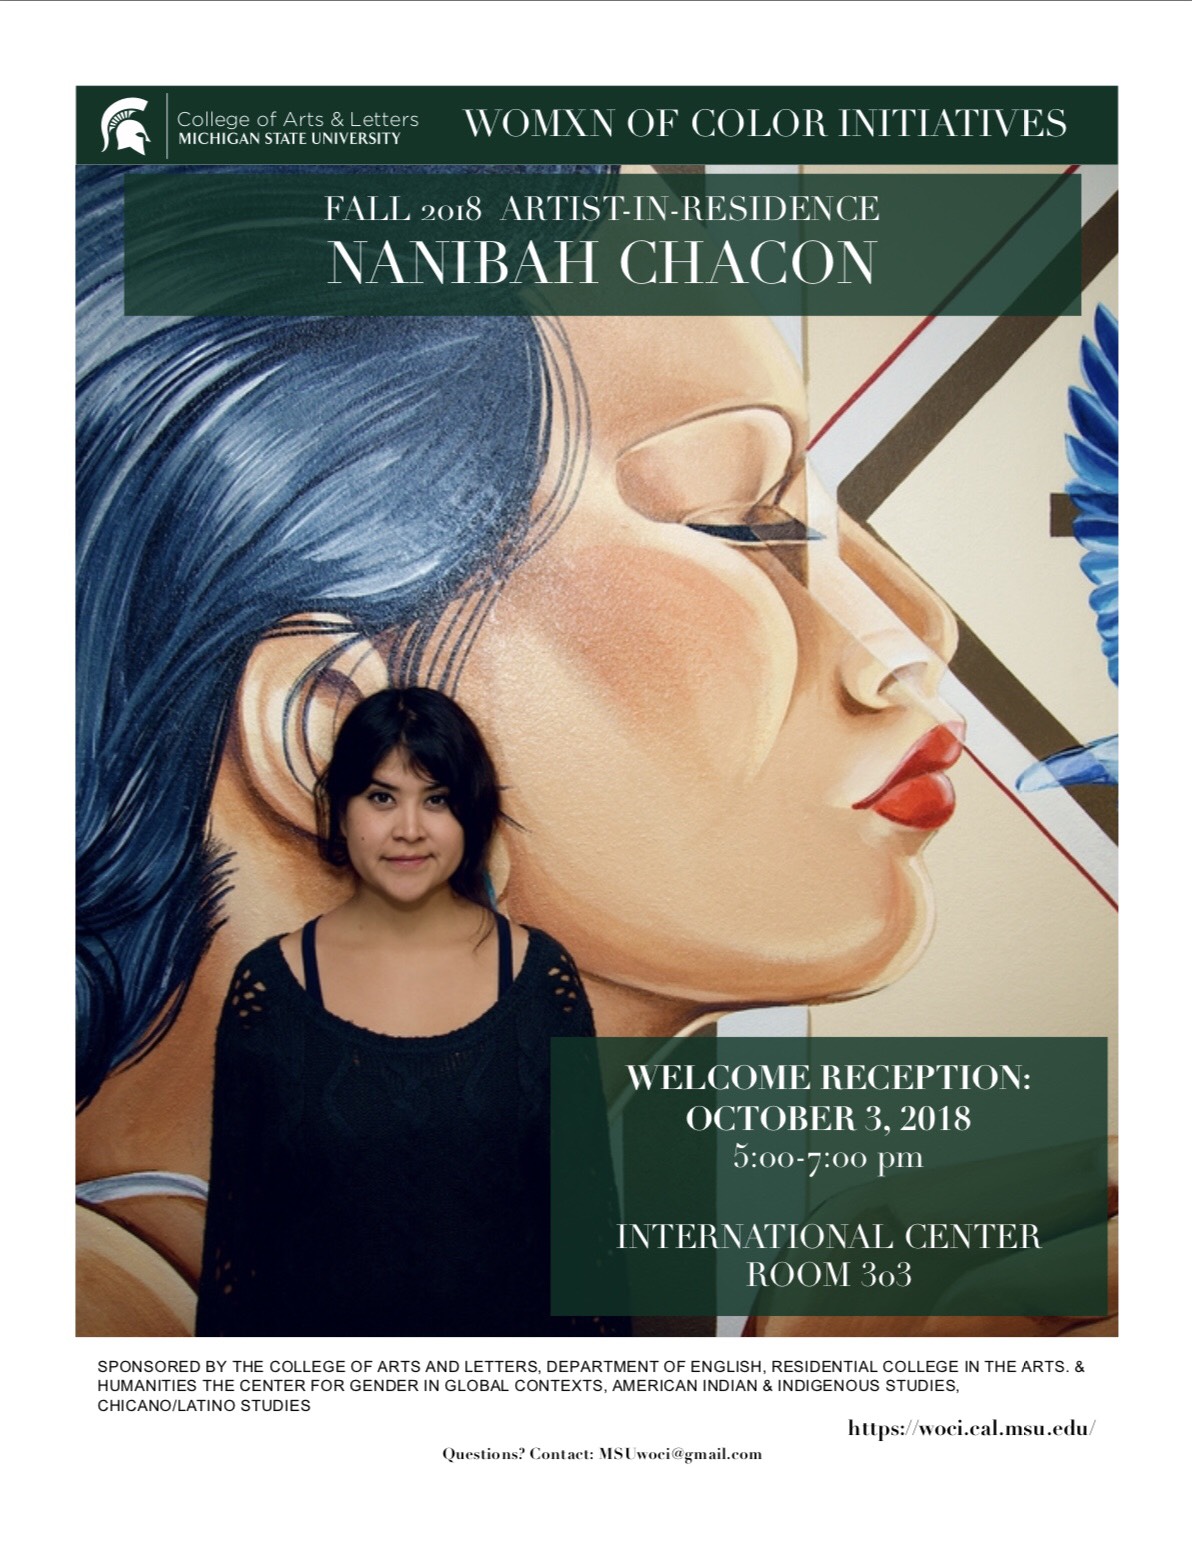 Welcome Reception for WOCI Artist-in-Residence, Nanibah Chacón @ International Center, Room 303 | East Lansing | Michigan | United States